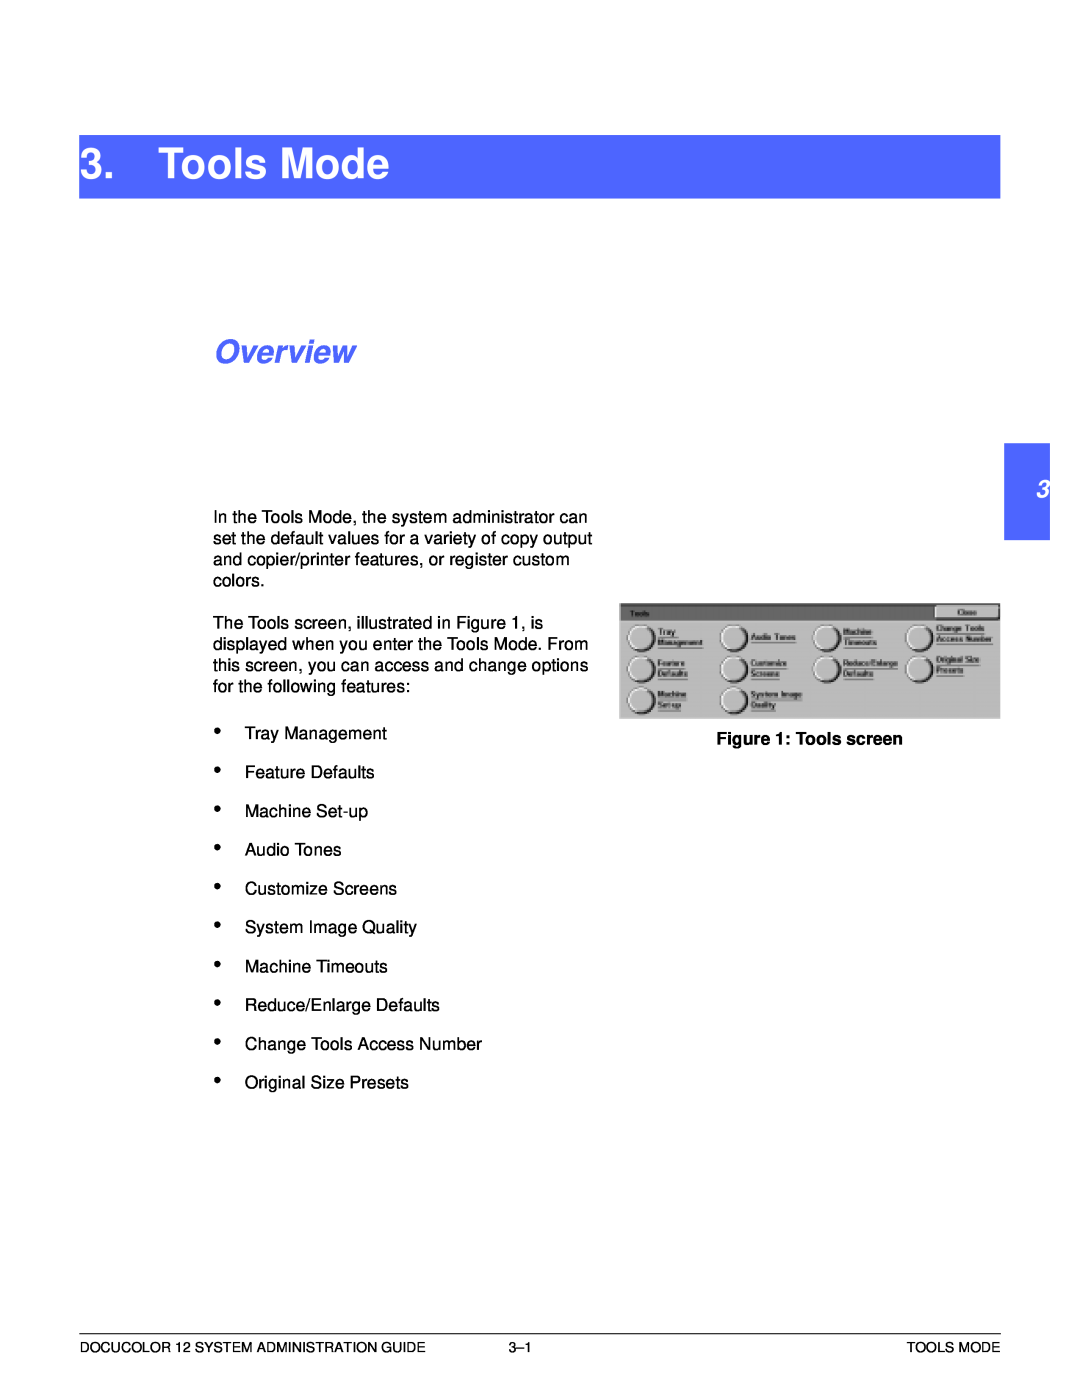 Xerox a2 manual Tools Mode, Overview, 1 2 3 4 5 6 7, Tools screen 